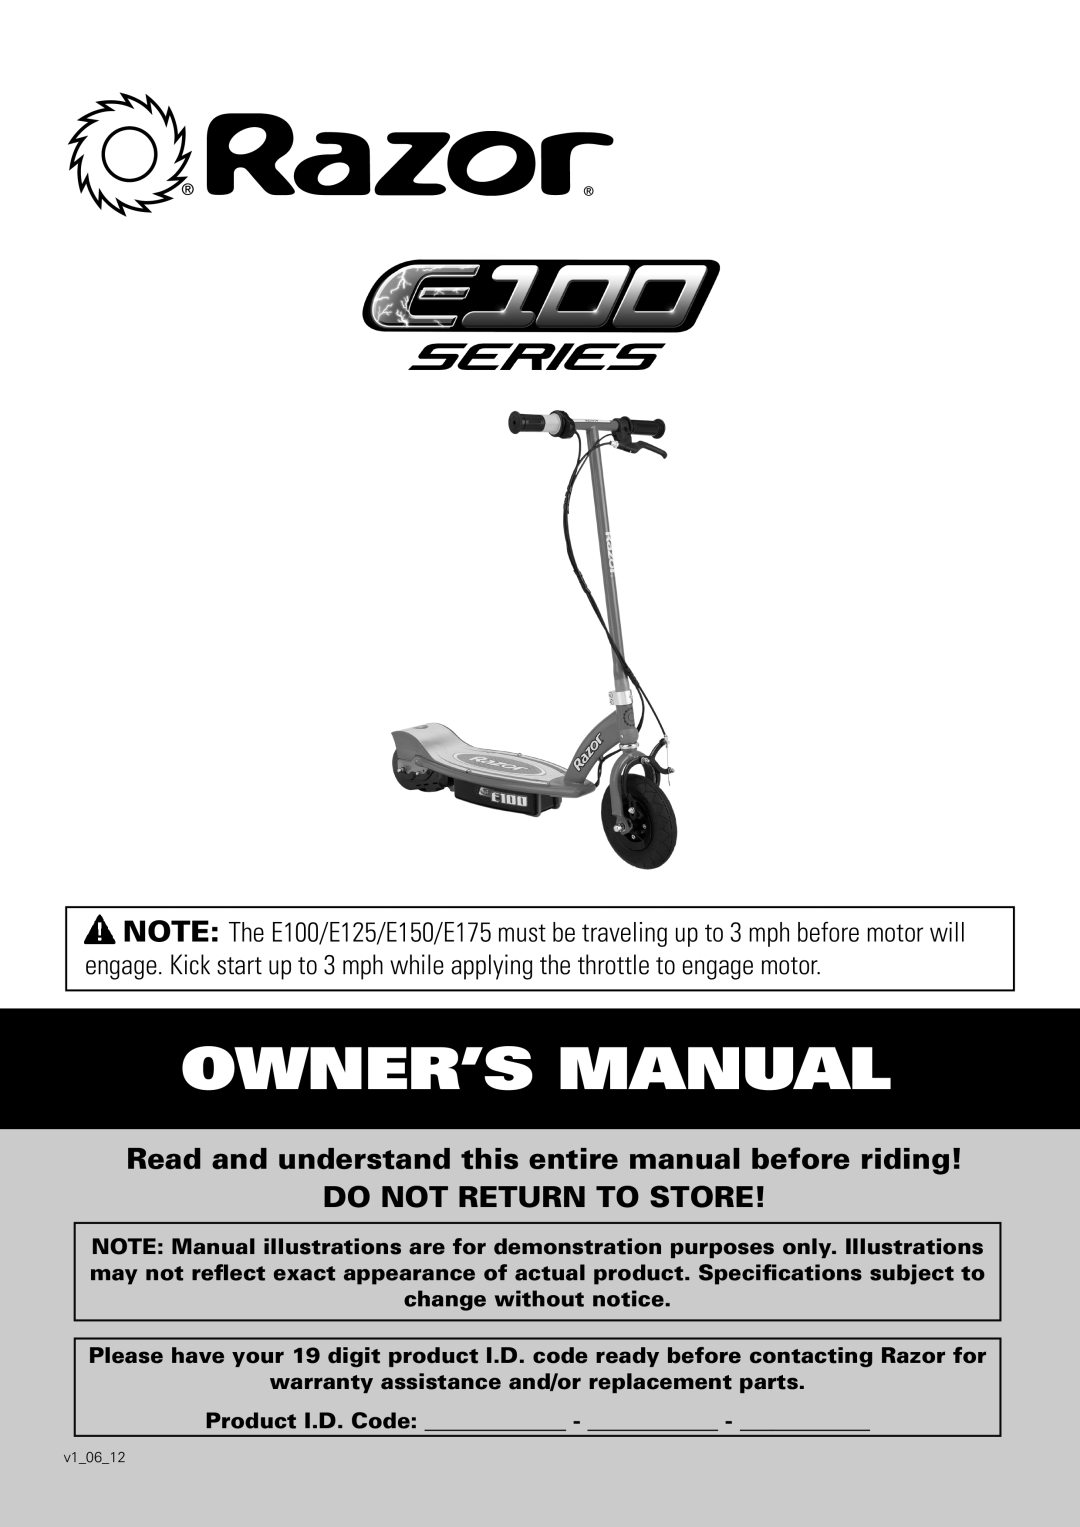 Razor E125, E100 owner manual Owner’S Manual, Read and understand this entire manual before riding, Do Not Return To Store 